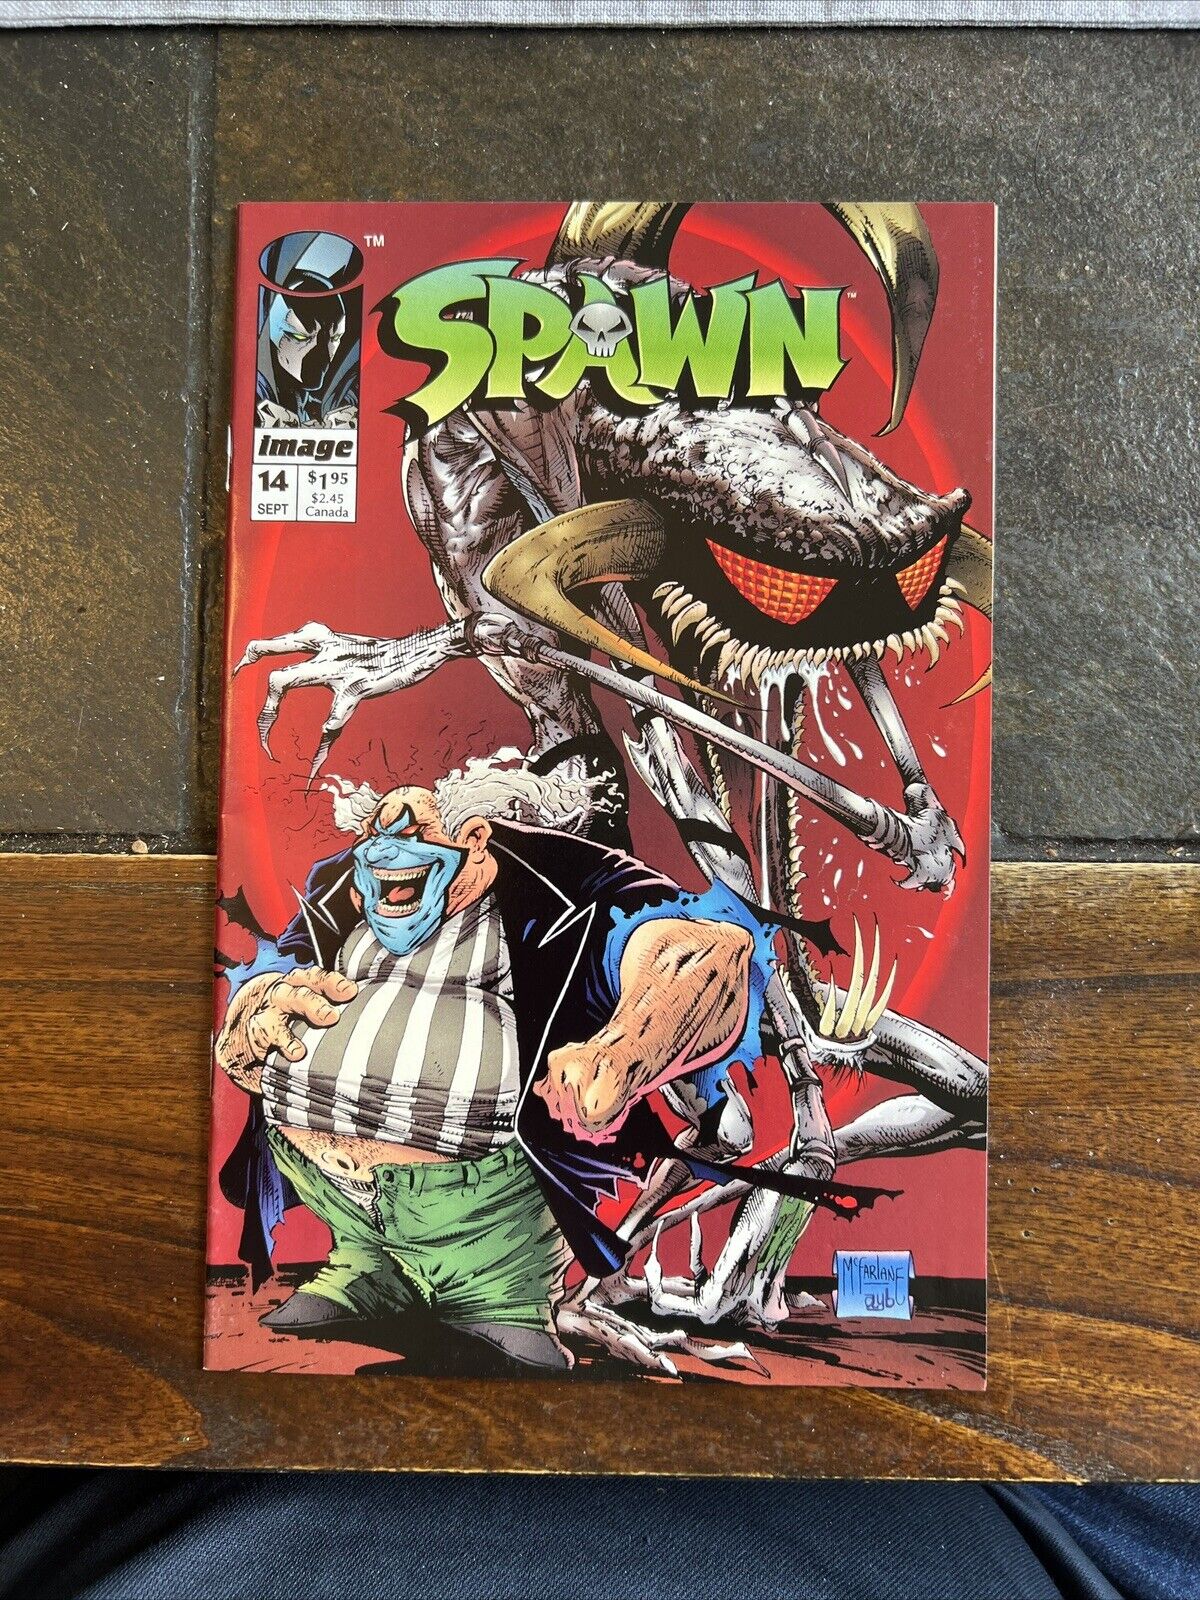 NobleSpirit Spawn Issue #14 Todd McFarlane SIGNED Image Comics xcd 